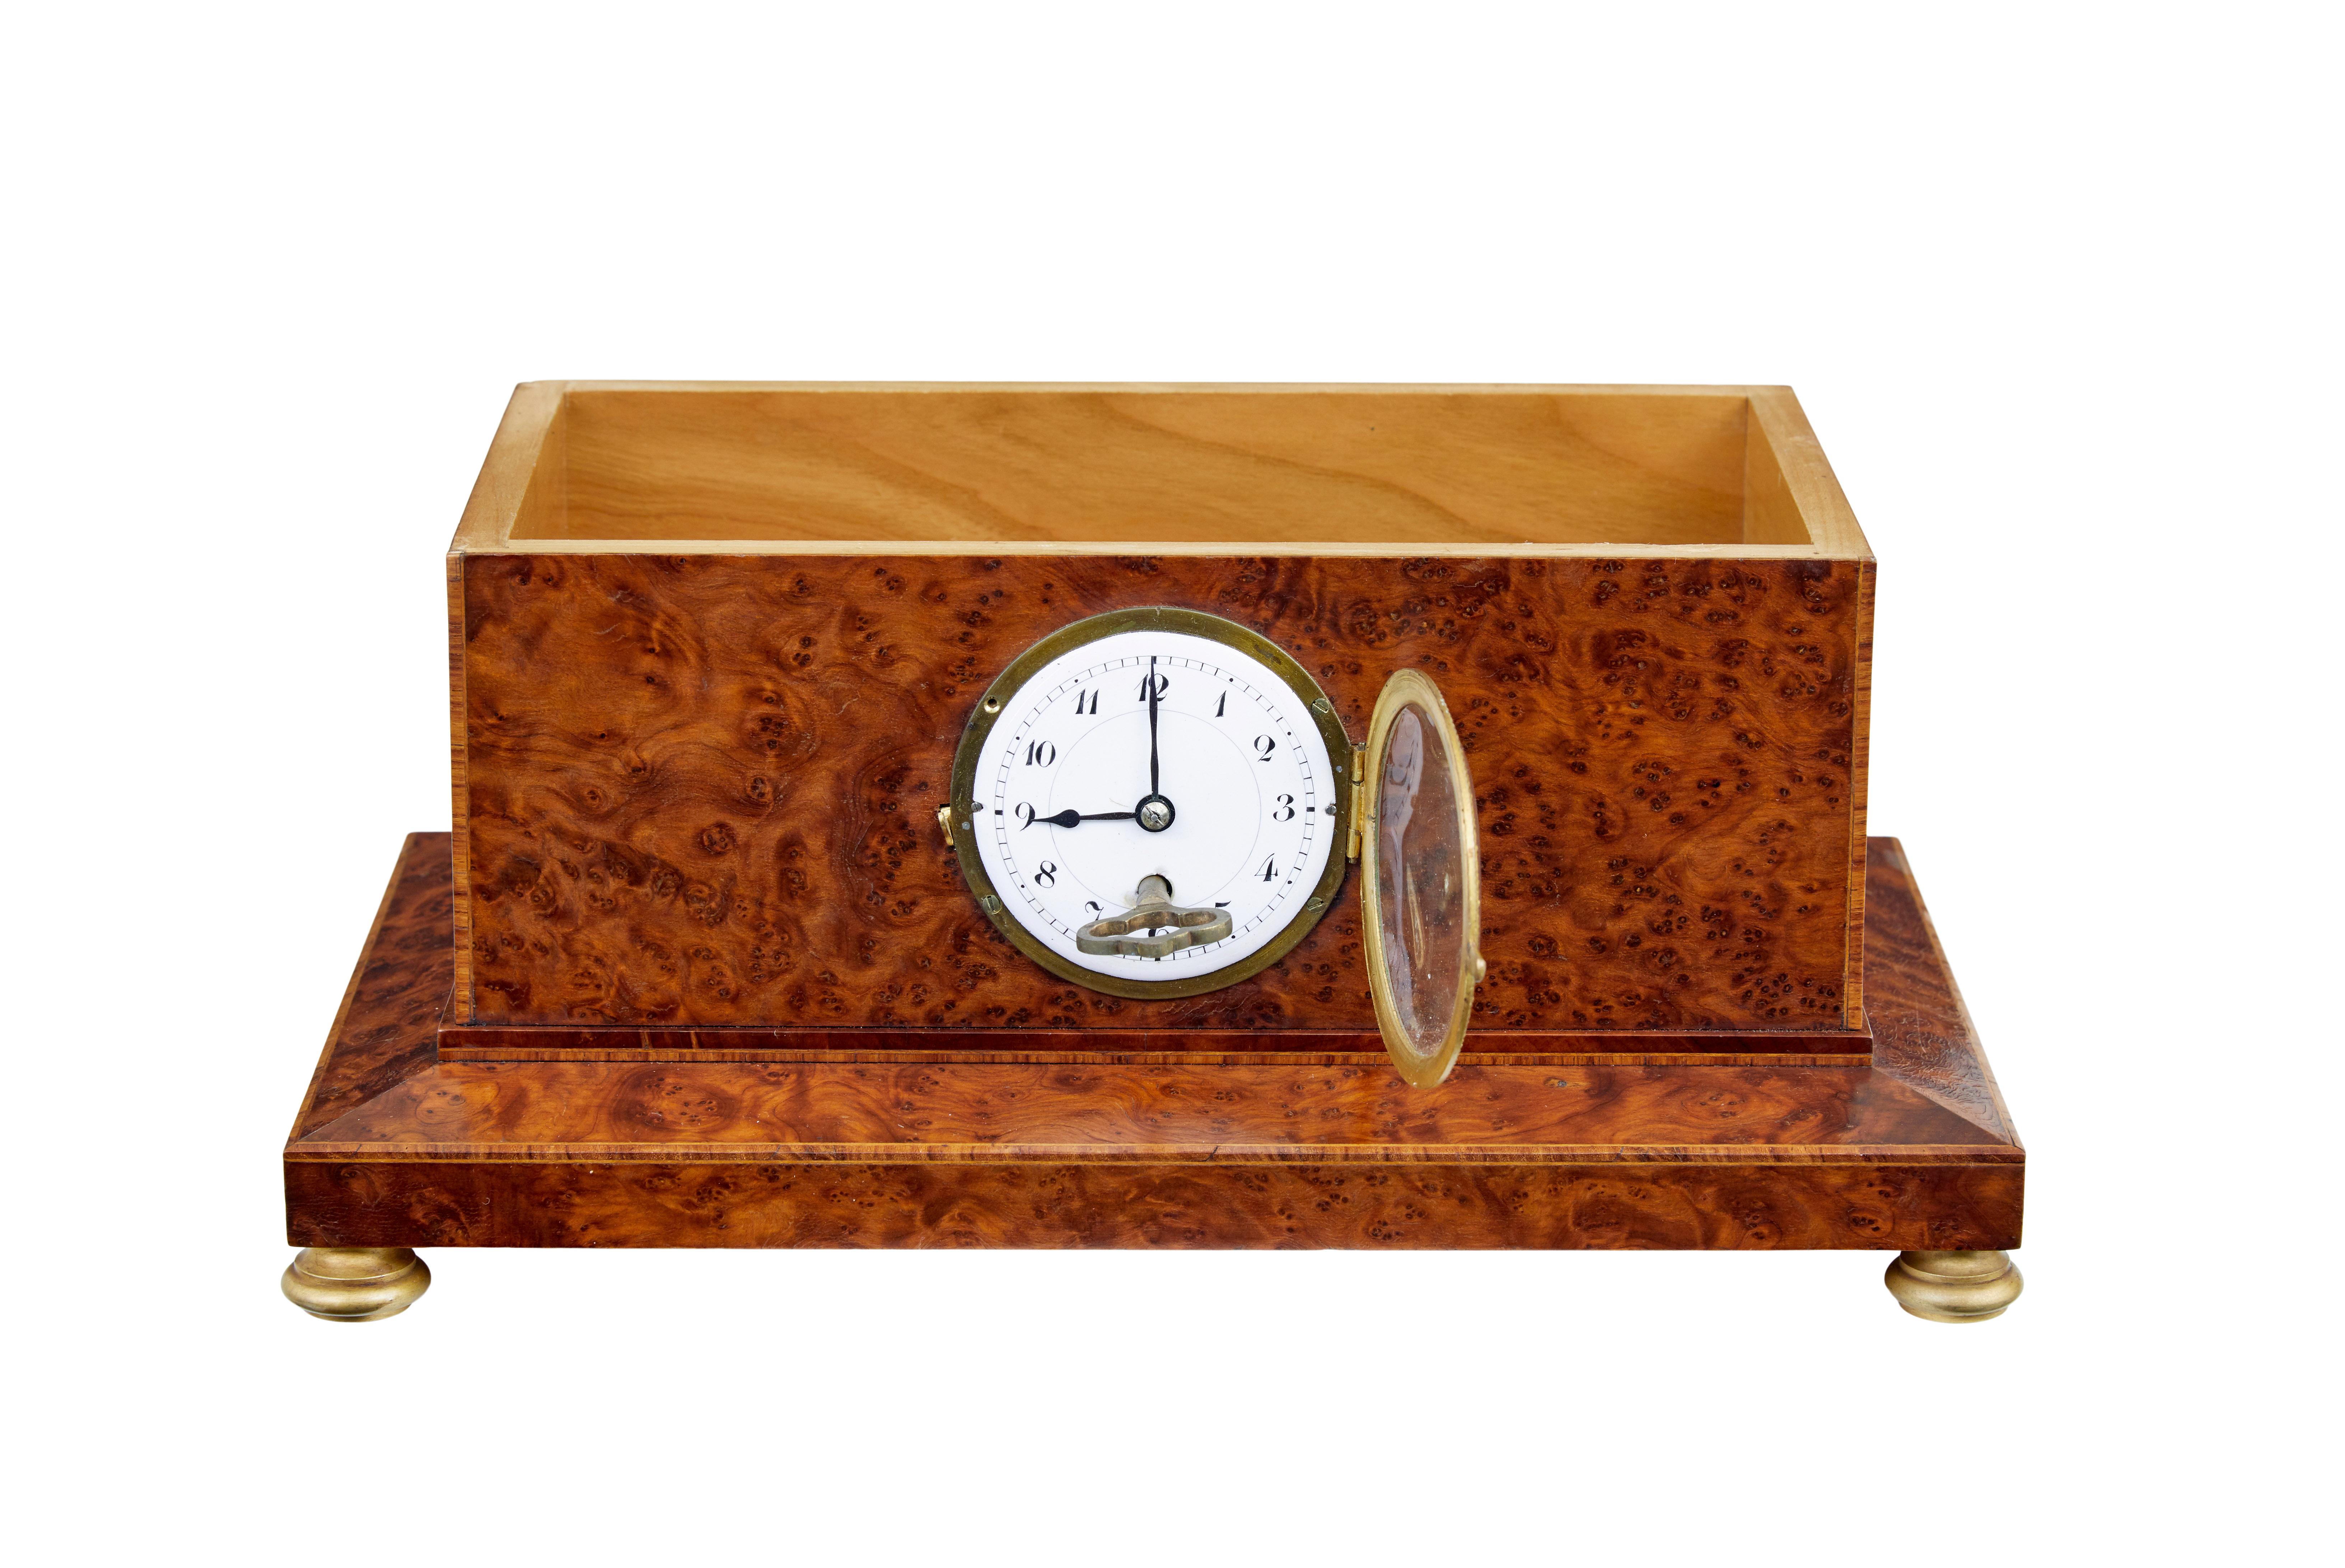 Early 20th century burr yew desktop box with clock circa 1920.

Empire revival burr yew cigar box with clock.  Strung and inlaid to outer edges, decorated with an ormolu mount to the lid and standing on ormolu bun feet.  Inset white enamel clock